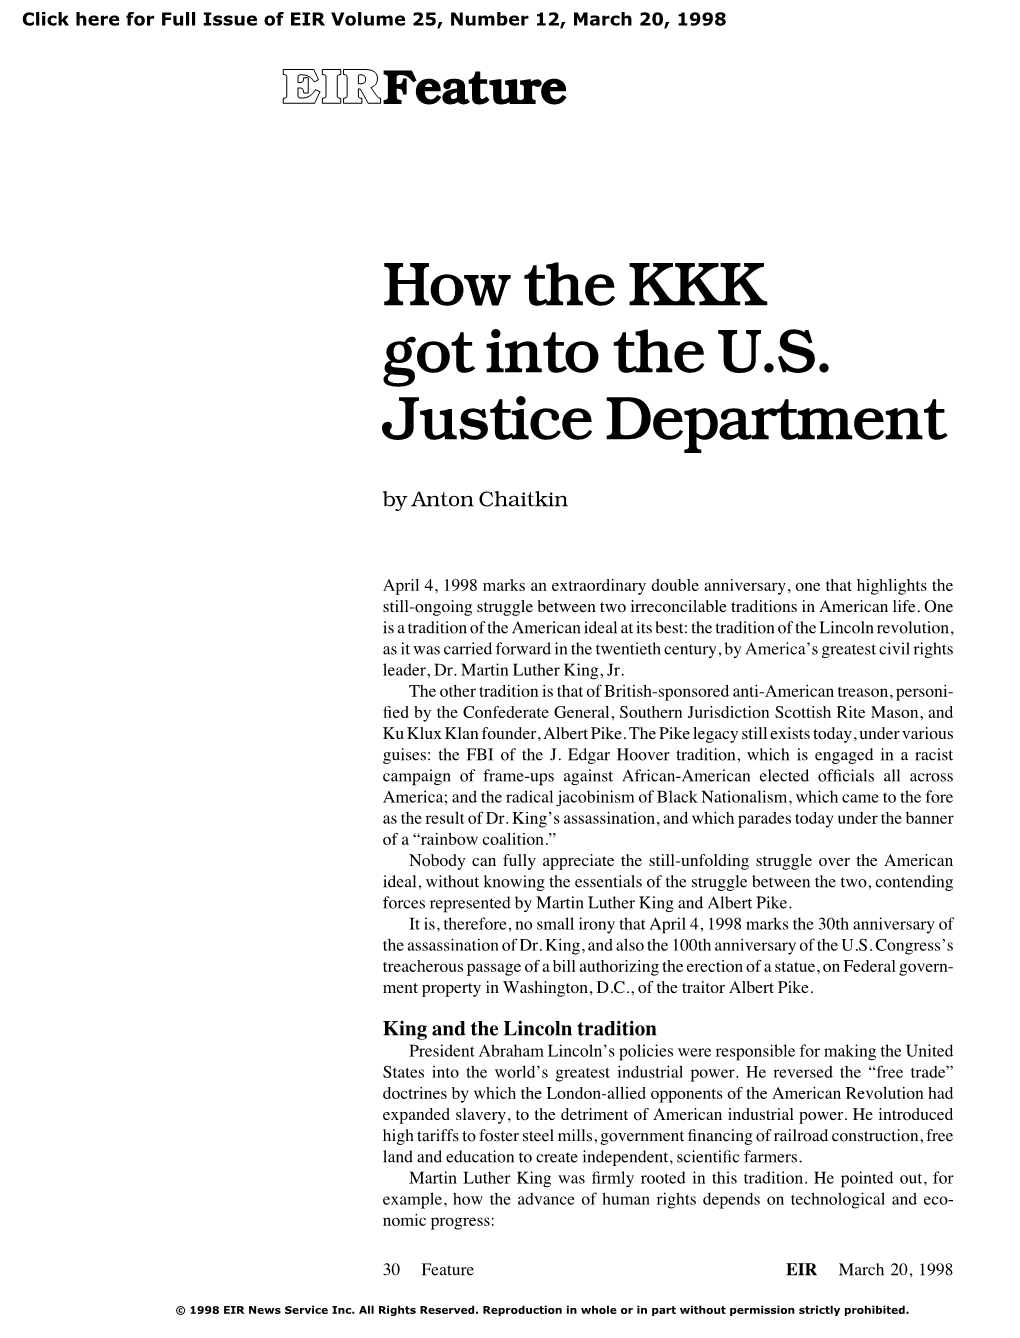 How the KKK Got Into the U.S. Justice Department